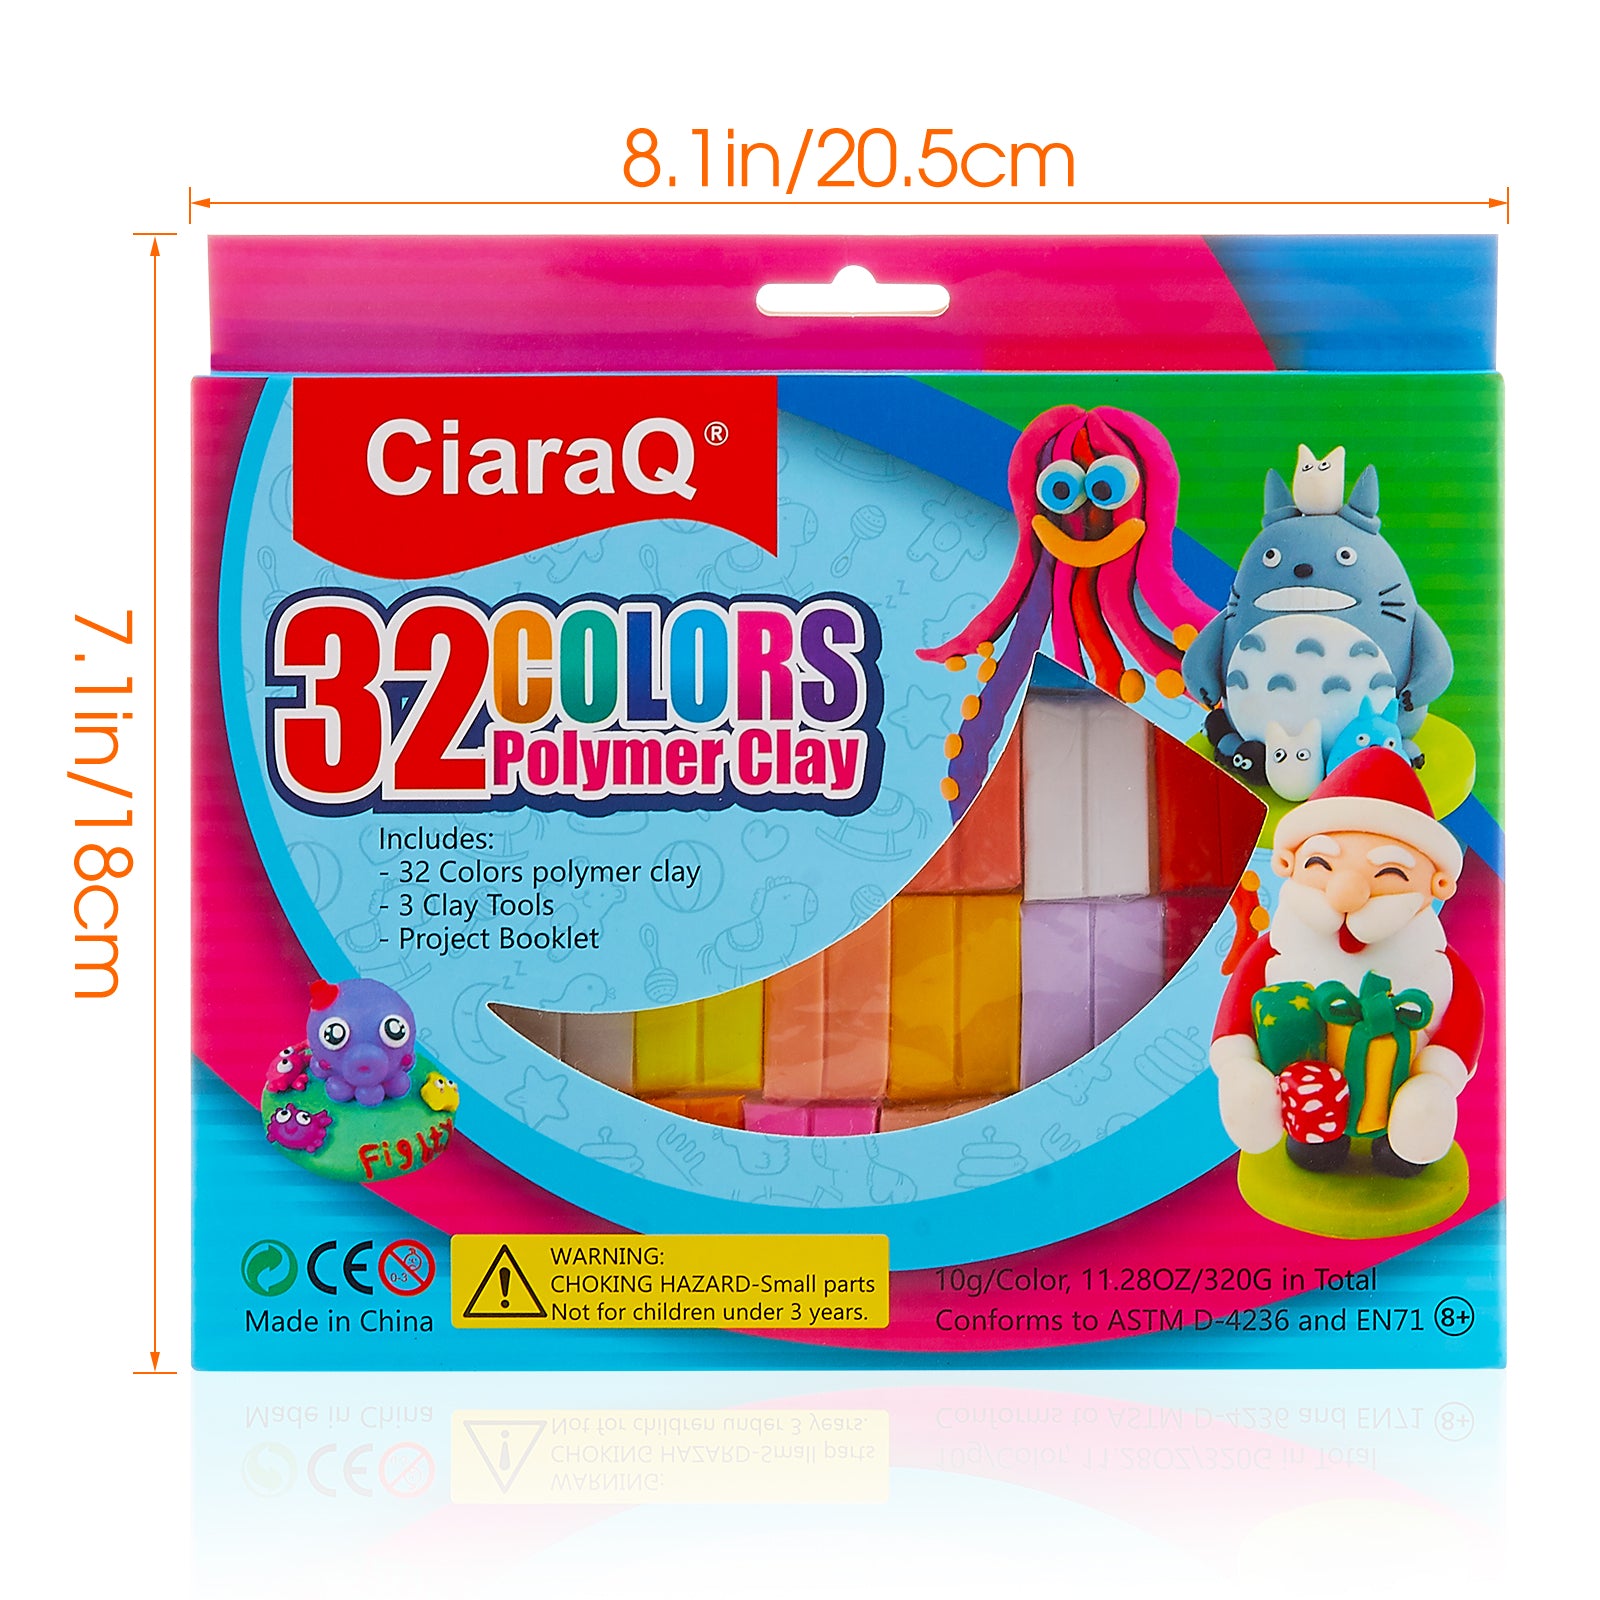 CiaraQ Polymer Clay-Oven Baked Modeling Clay with Sculpting Tools, 24  Colors, 1.2 lbs, Great Gift for Children and Artists.